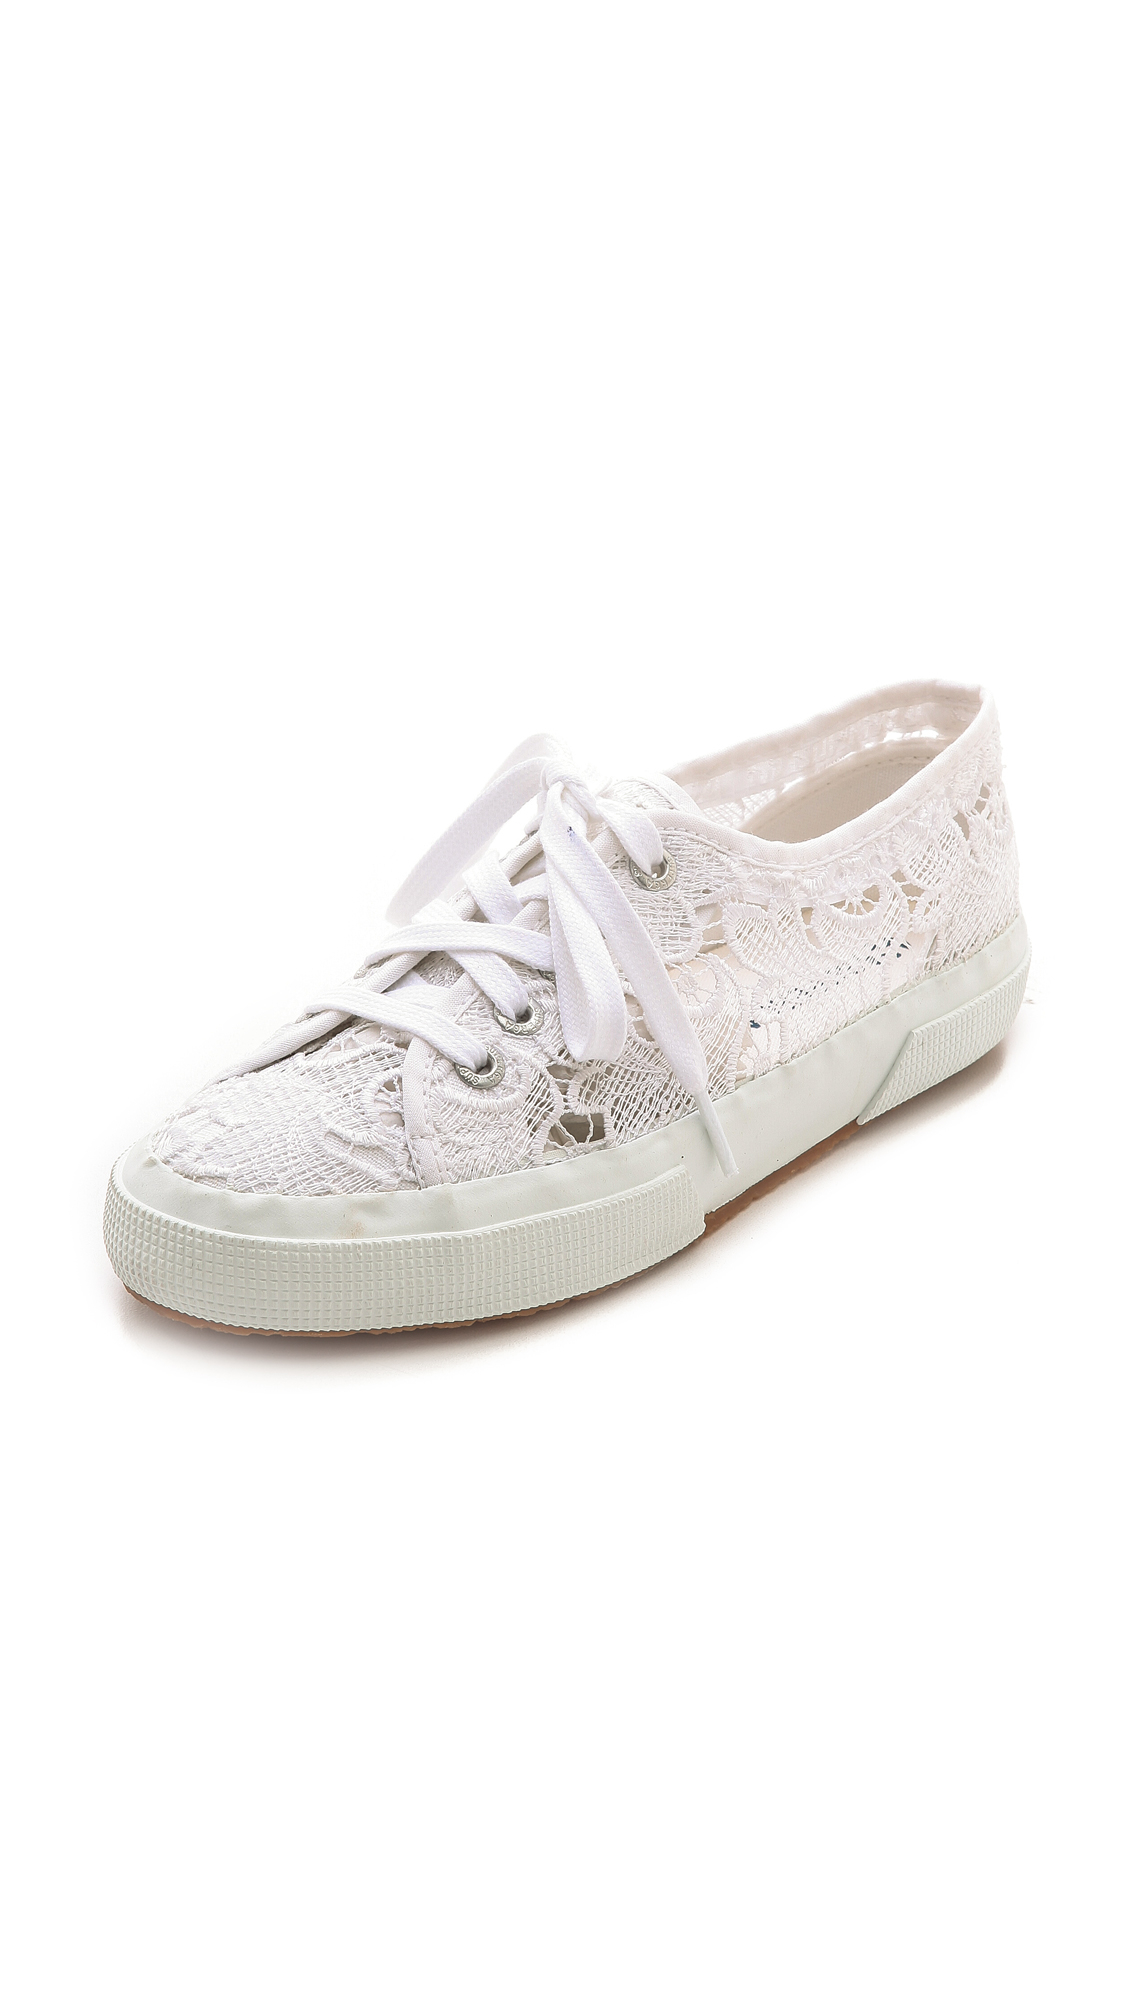 Superga Lace Sneakers in White - Lyst